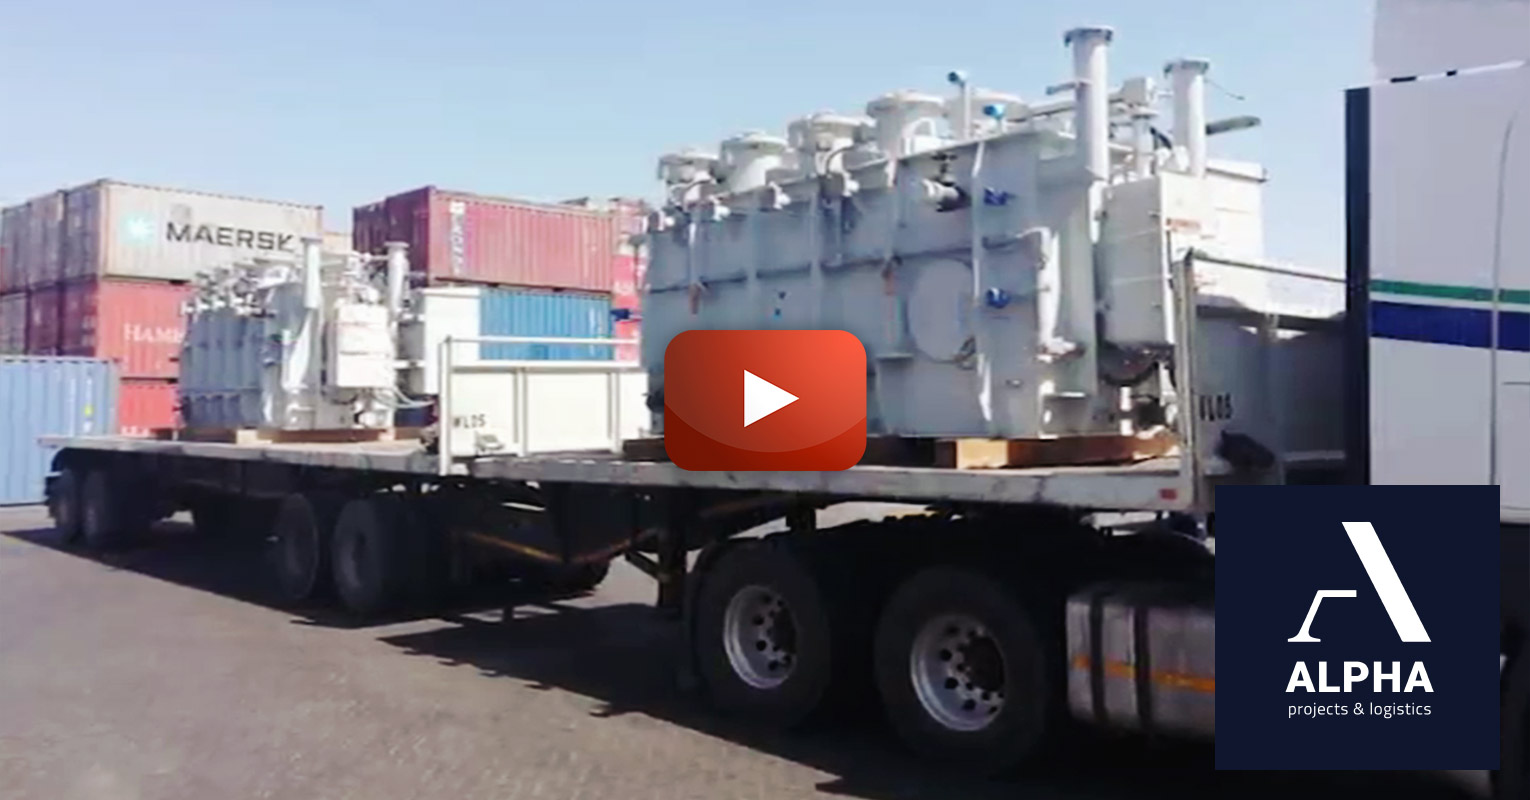 Alpha Projects & Logistics Delivers Transformers to Boost the Power in Namibia